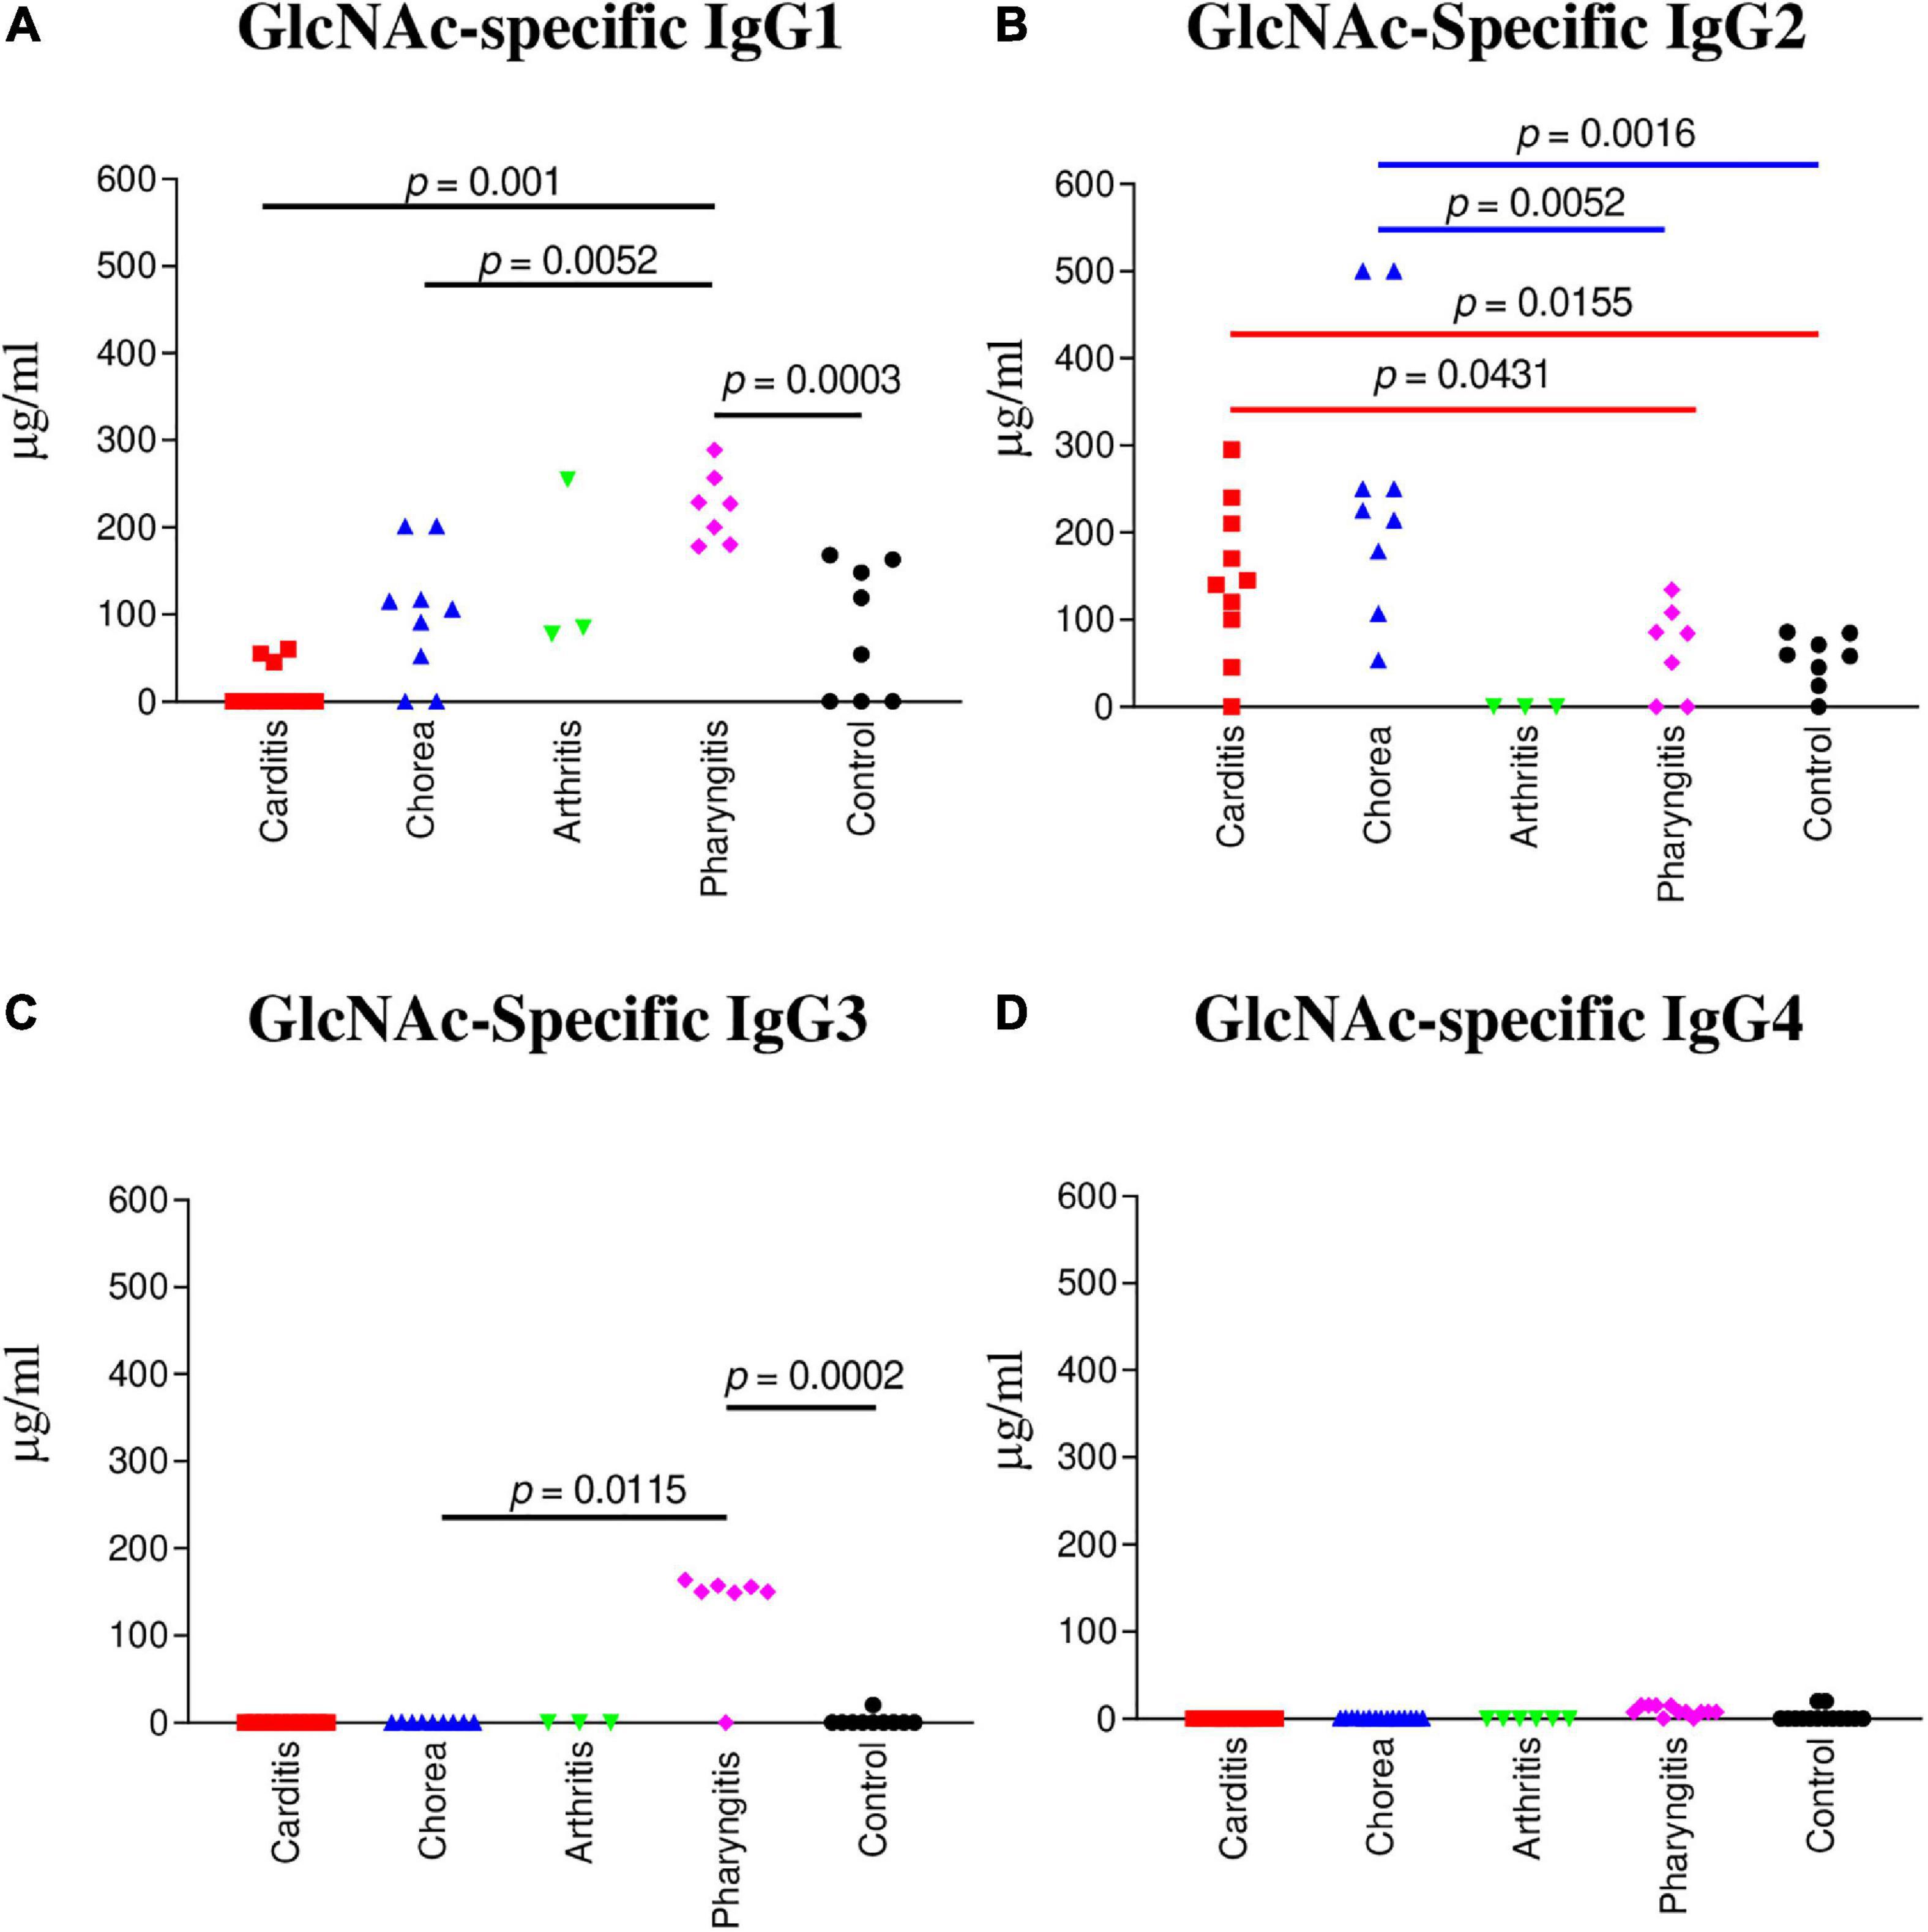 IgG2 rules: N-acetyl-β-D-glucosamine-specific IgG2 and Th17/Th1 cooperation may promote the pathogenesis of acute rheumatic heart disease and be a biomarker of the autoimmune sequelae of Streptococcus pyogenes